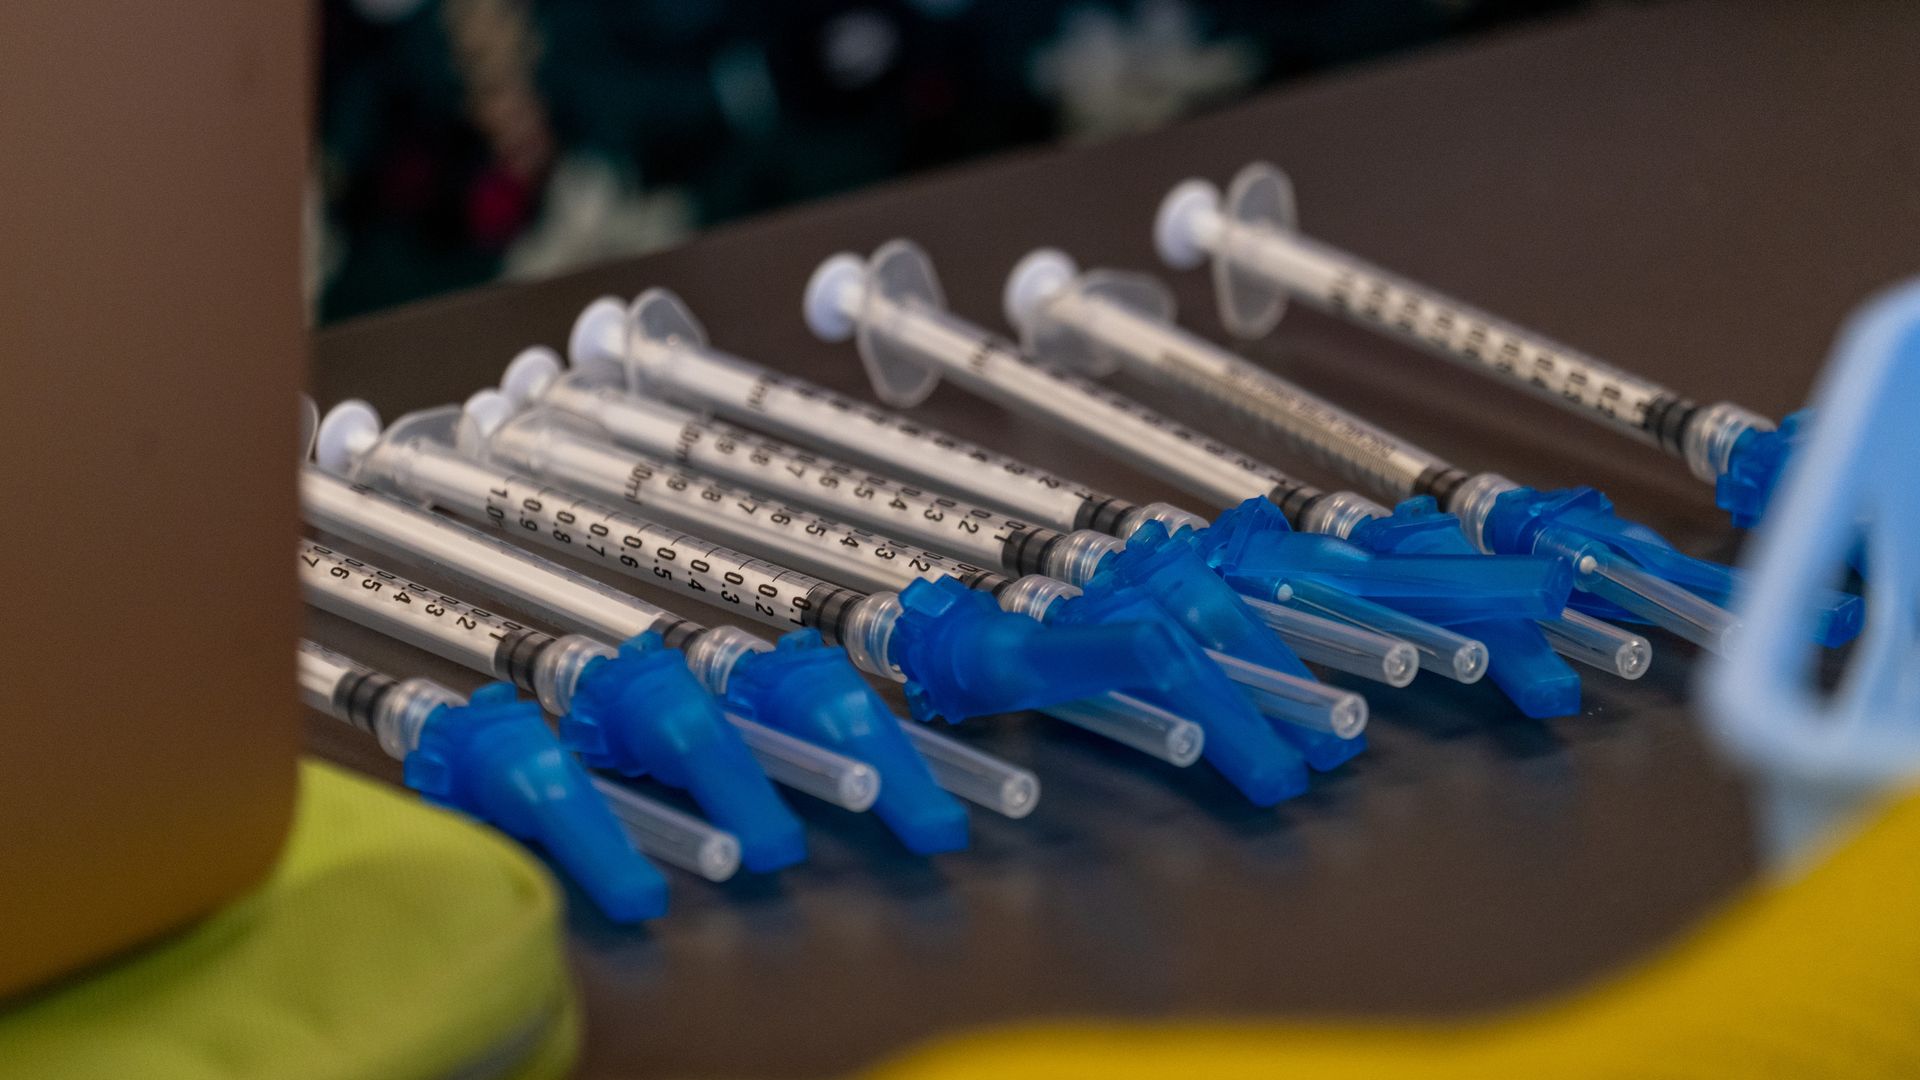 Several syringes with blue tips sit side by side on a wooden table